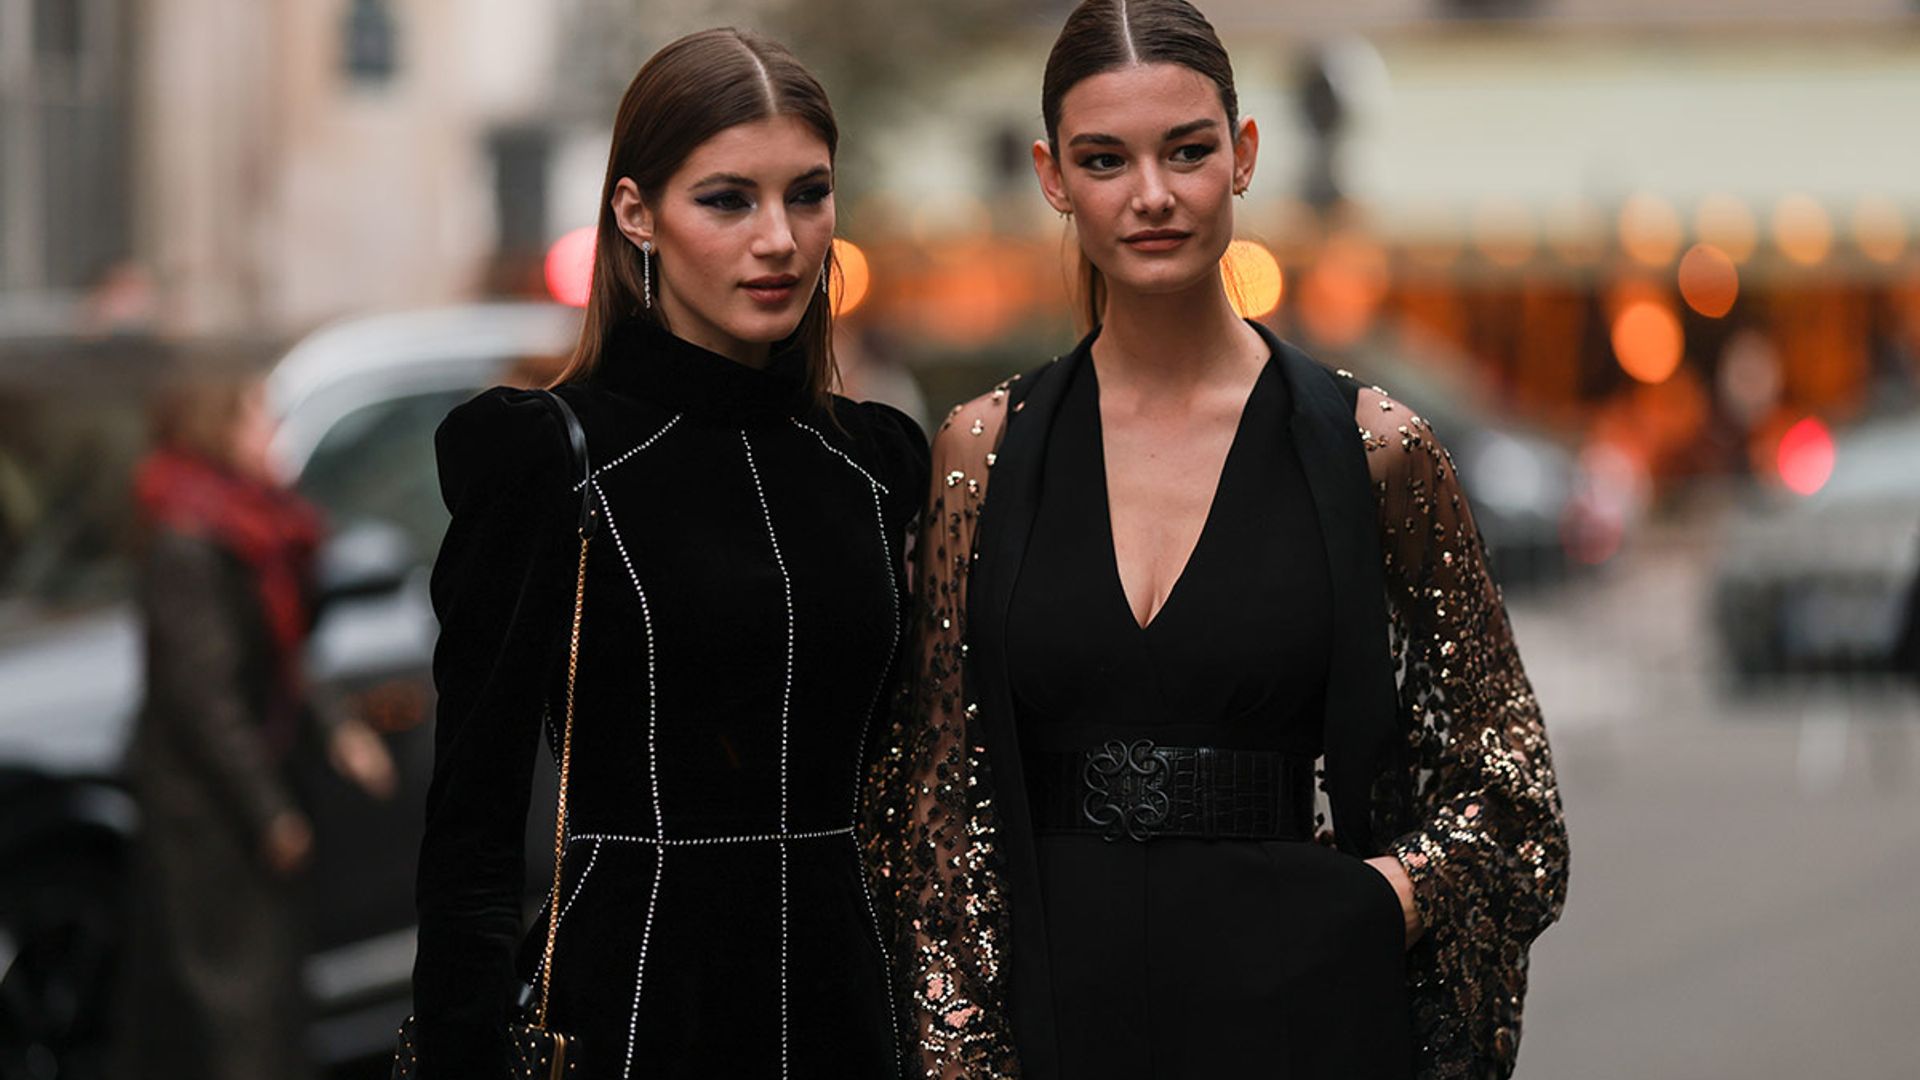 11 best little black dresses for party season – because the LBD NEVER goes out of style